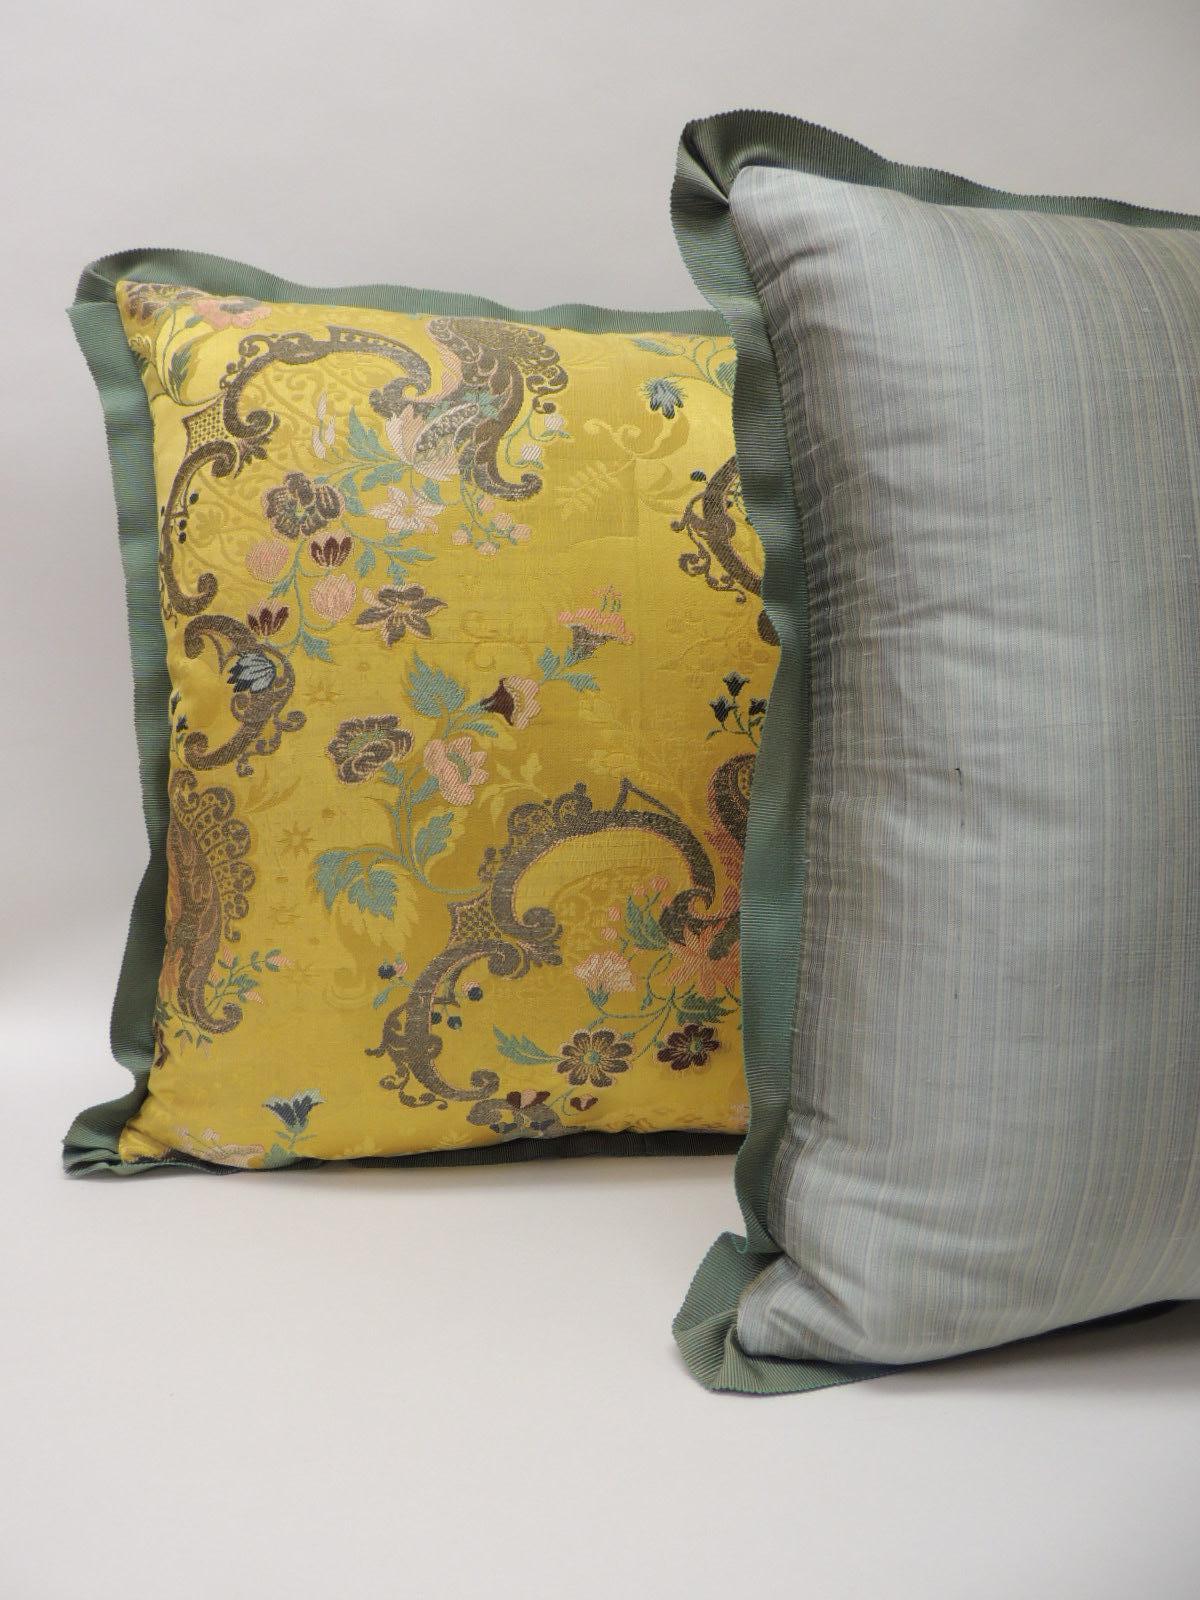 Regency Pair of Antique Green and Gold Brocade French Silk Decorative Pillows